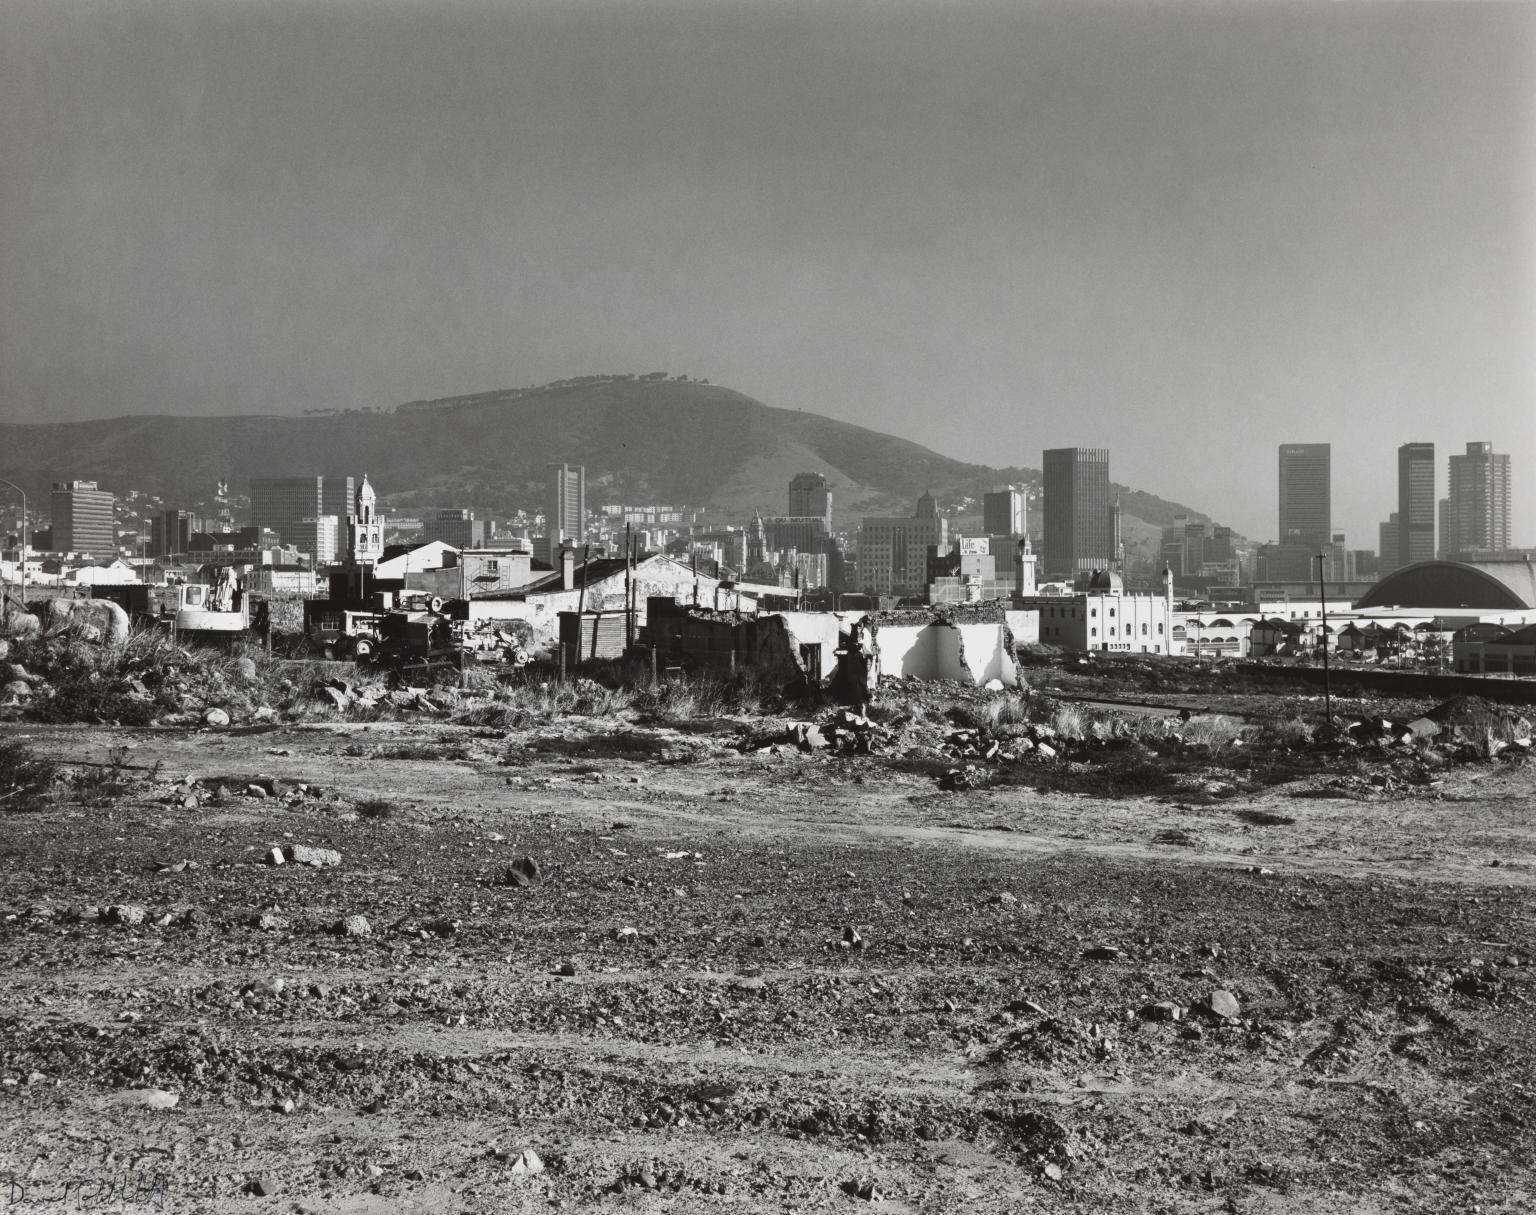 P80494: The destruction of District Six under the Group Areas Act. Cape Town, Cape. 5 May 1982